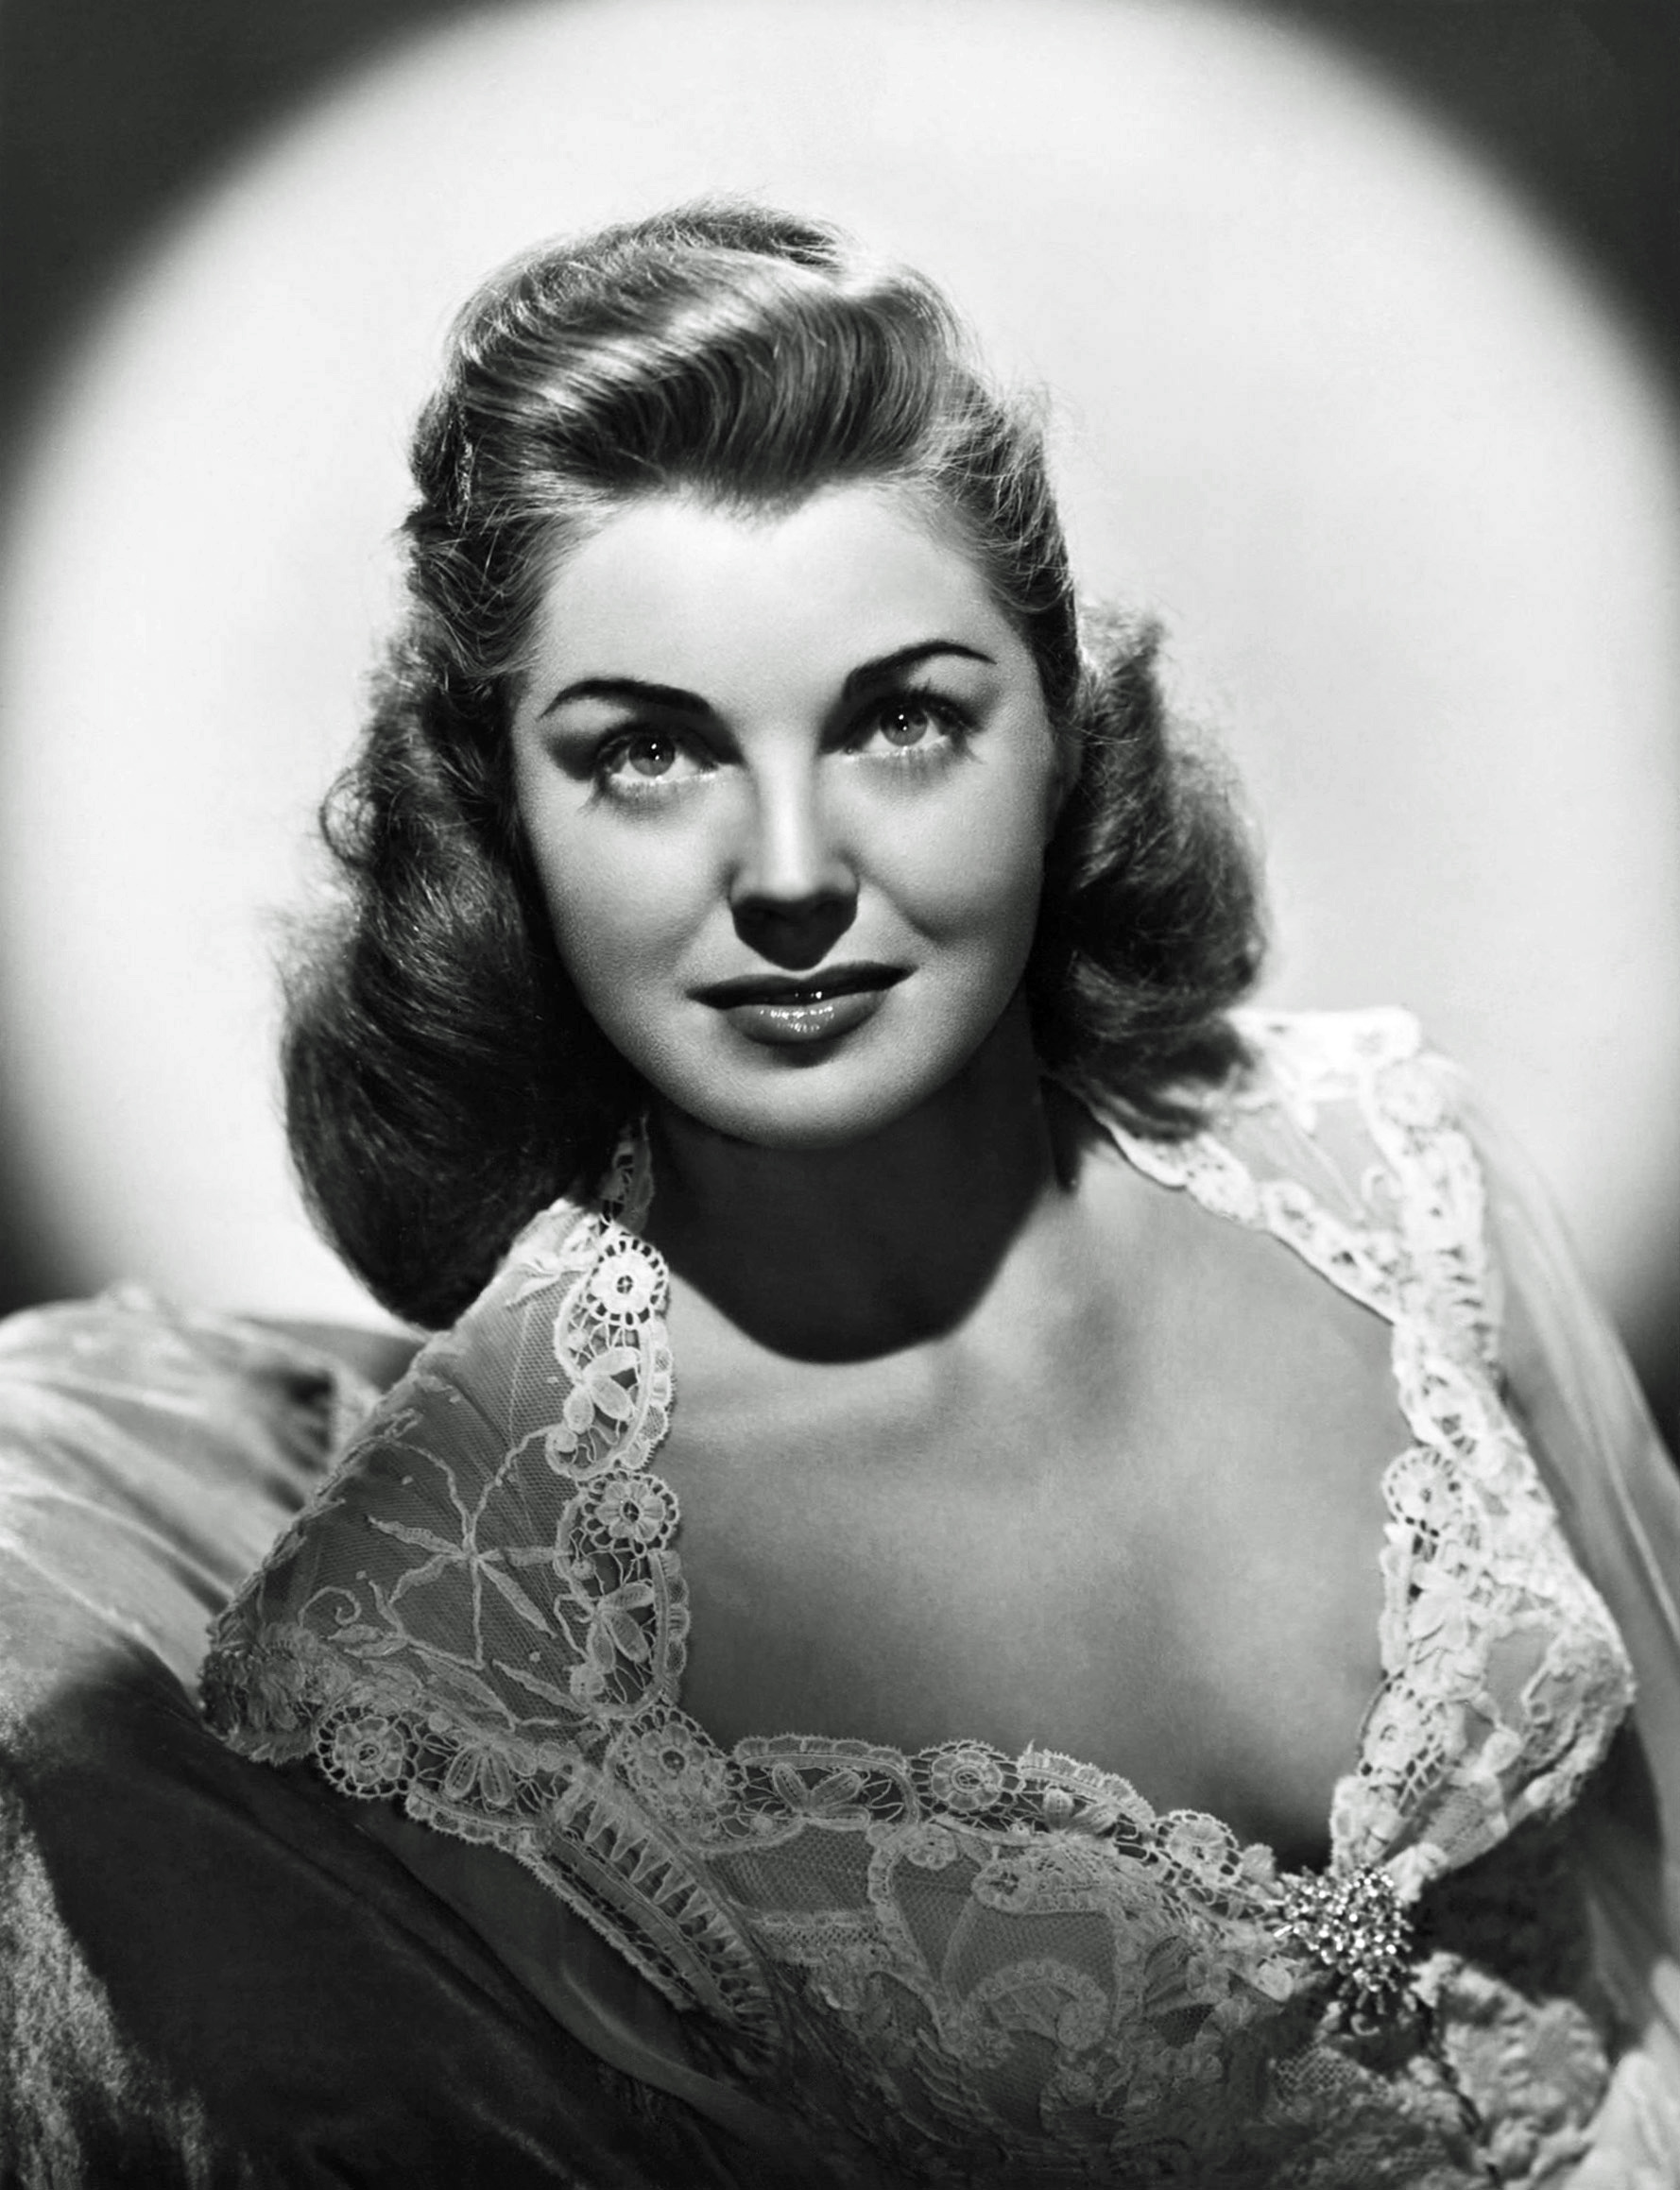 R.I.P. : Swimmer turned movie star, Esther Williams, dead at 91 Annex%20-%20Williams,%20Esther_04